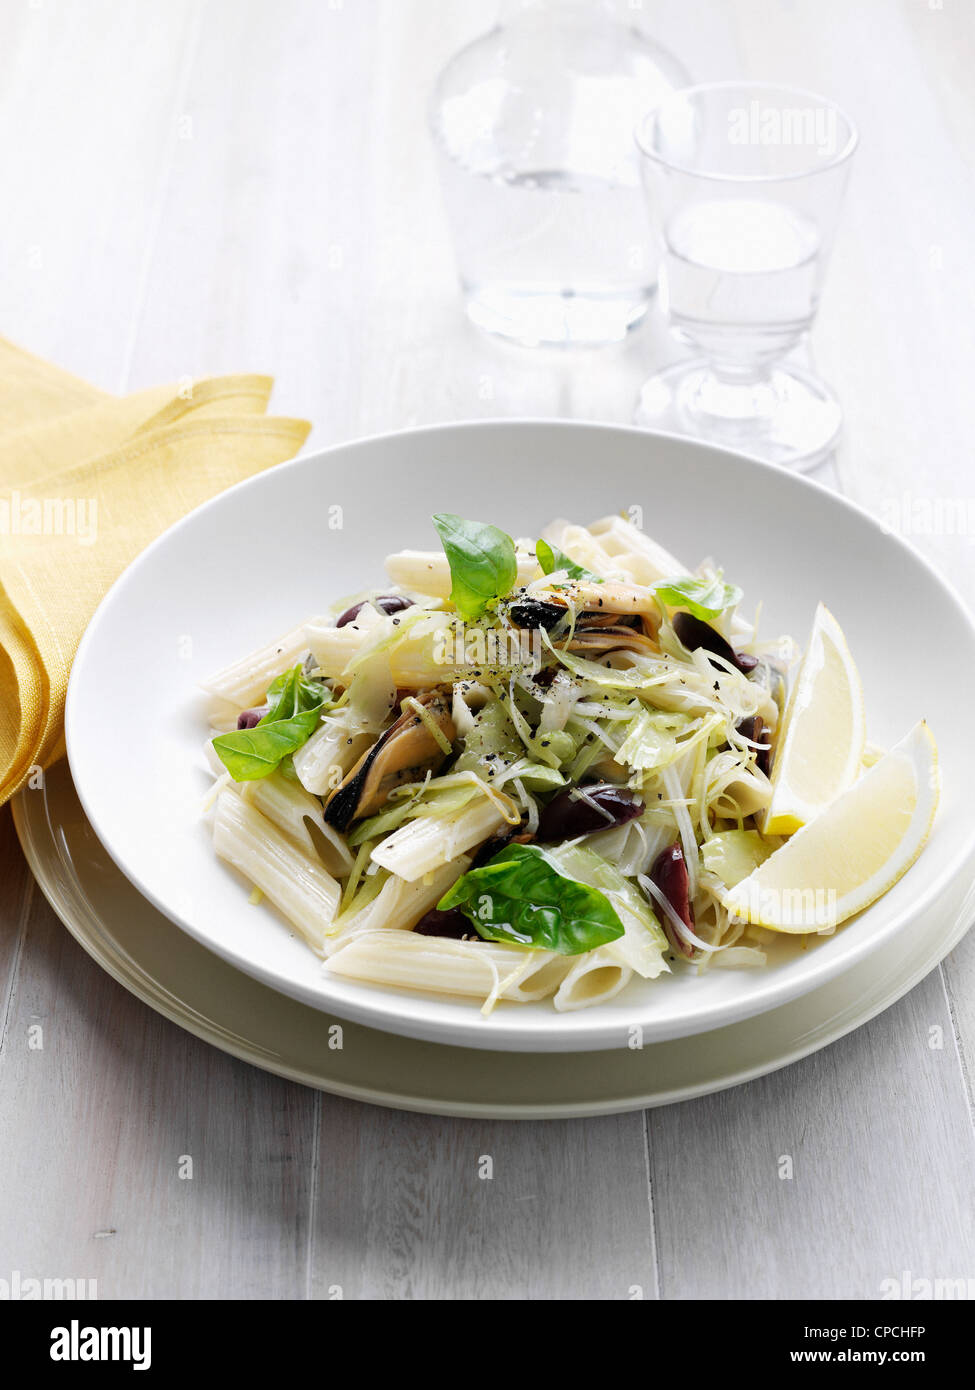 Bowl of pasta with olives and cheese Stock Photo